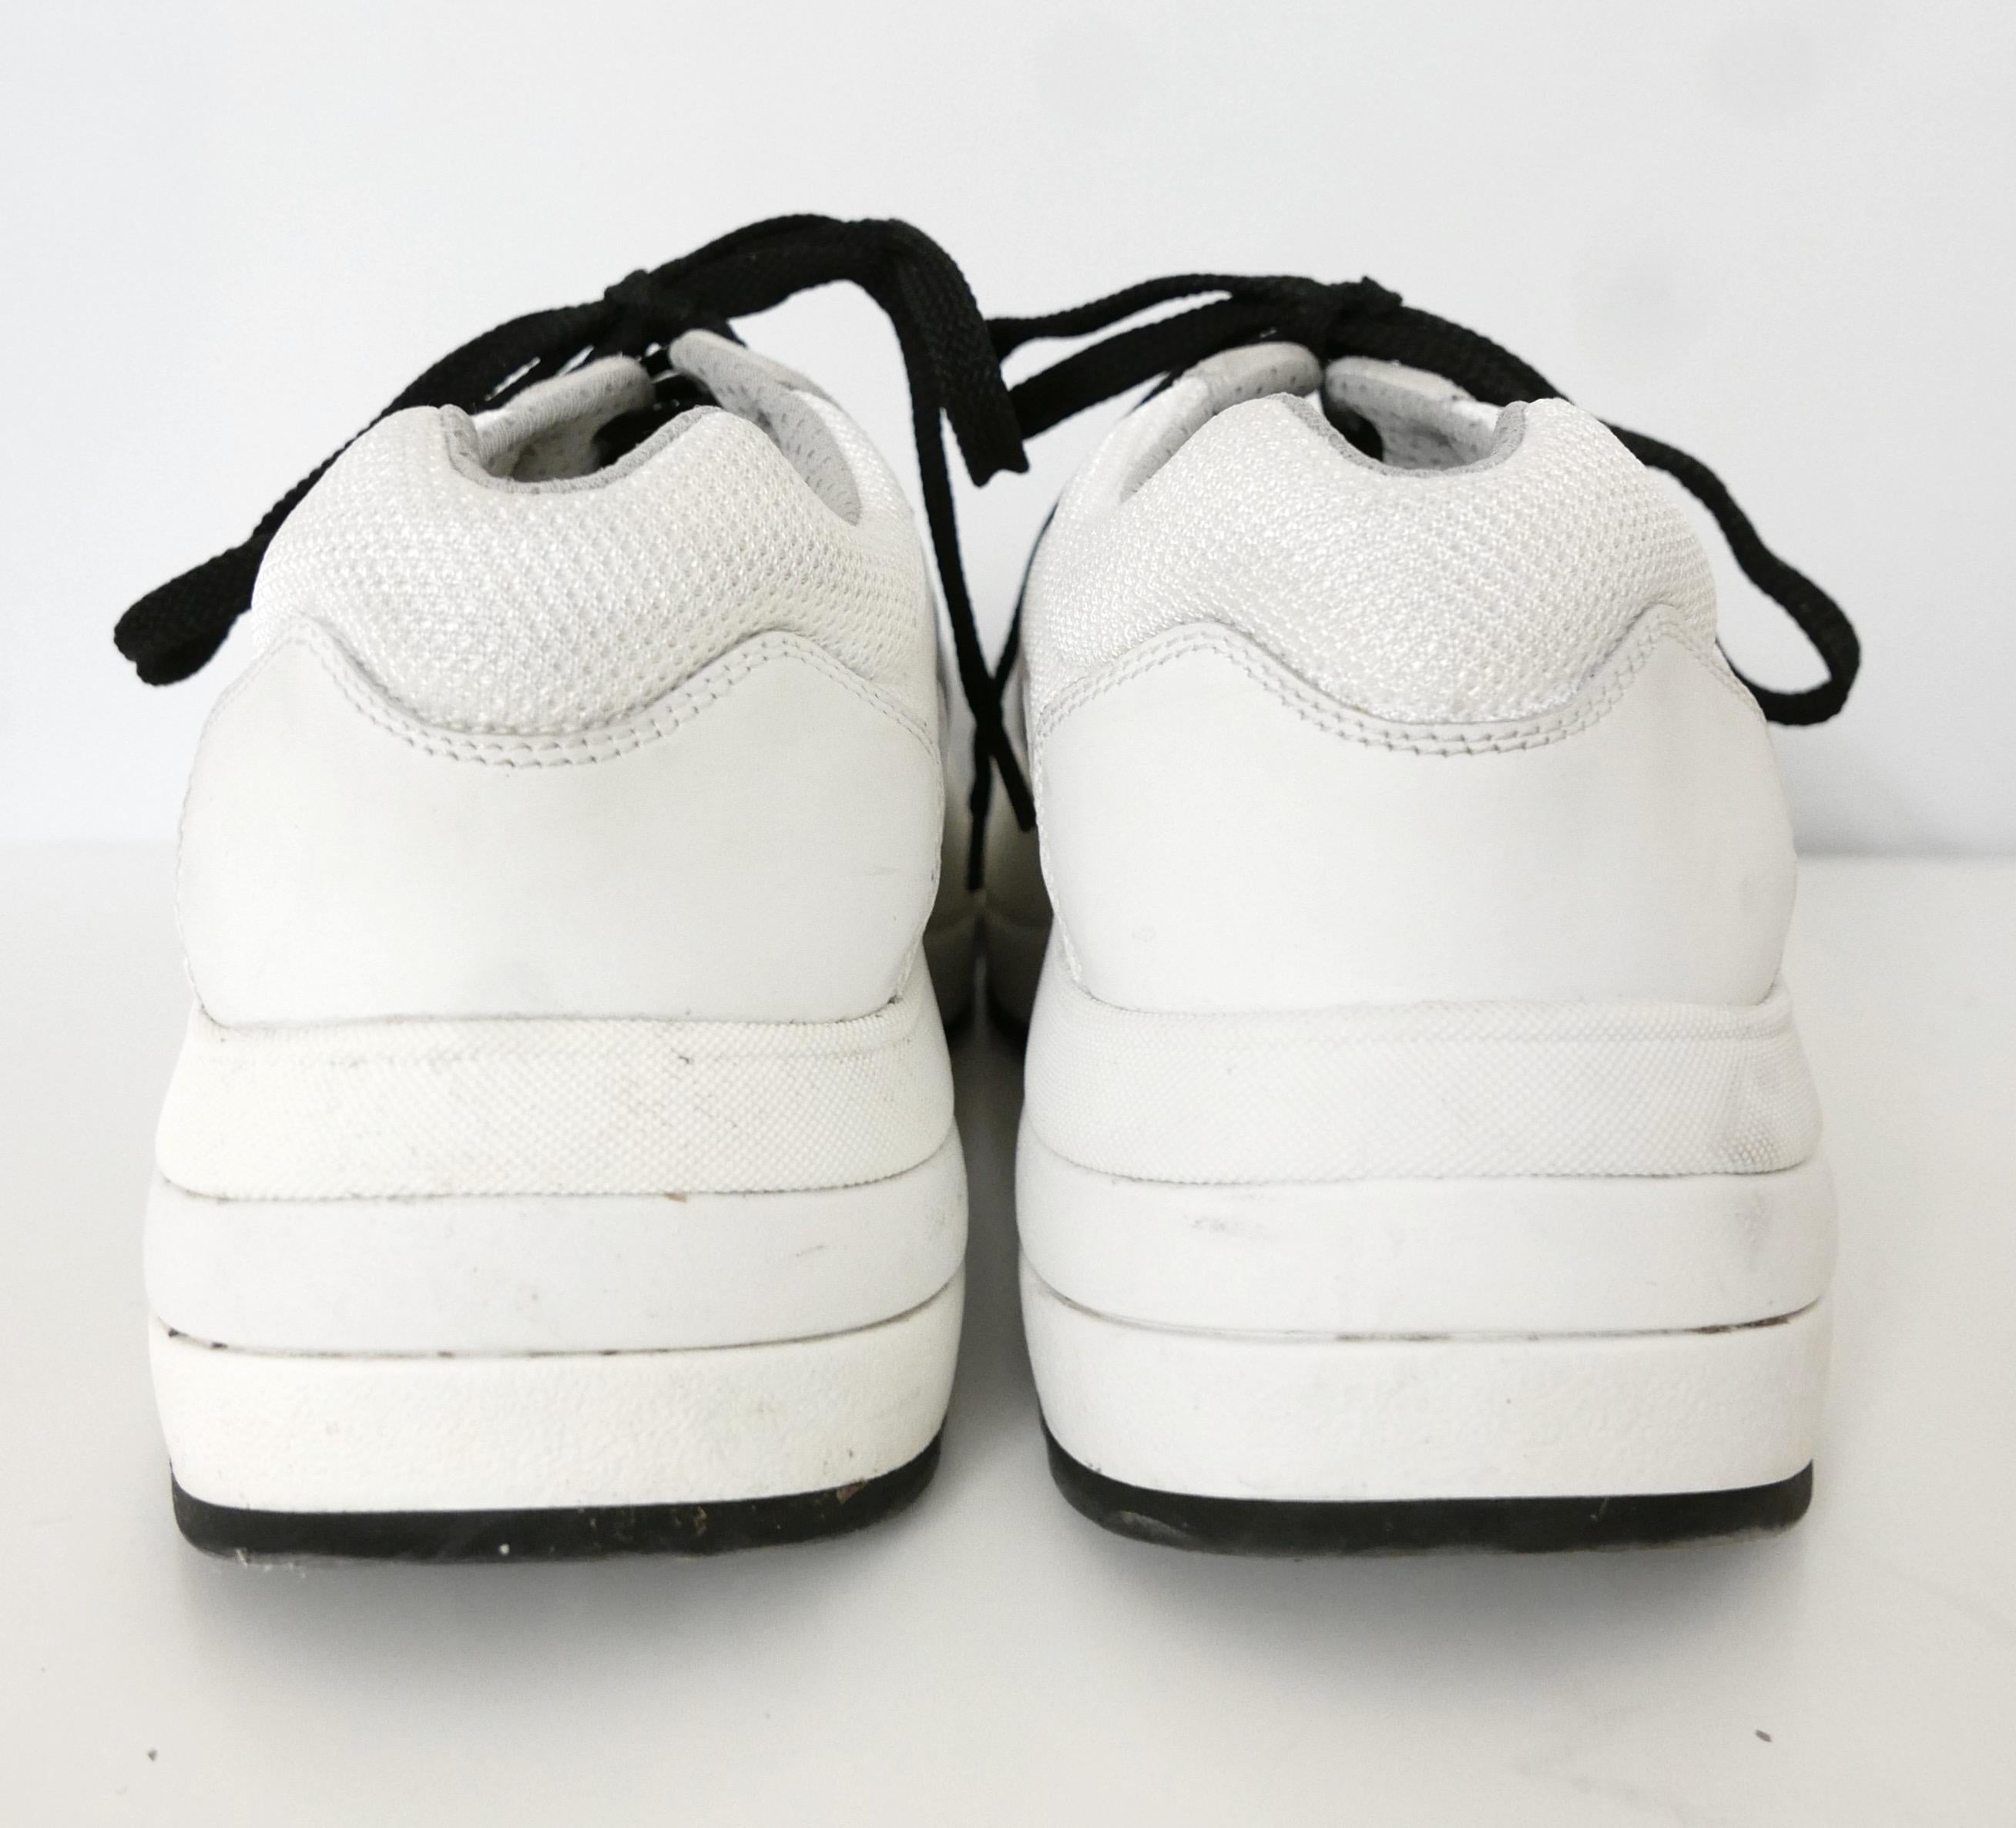 Celine x Philo 2018 Delivery Trainers Sneakers White In Excellent Condition For Sale In London, GB